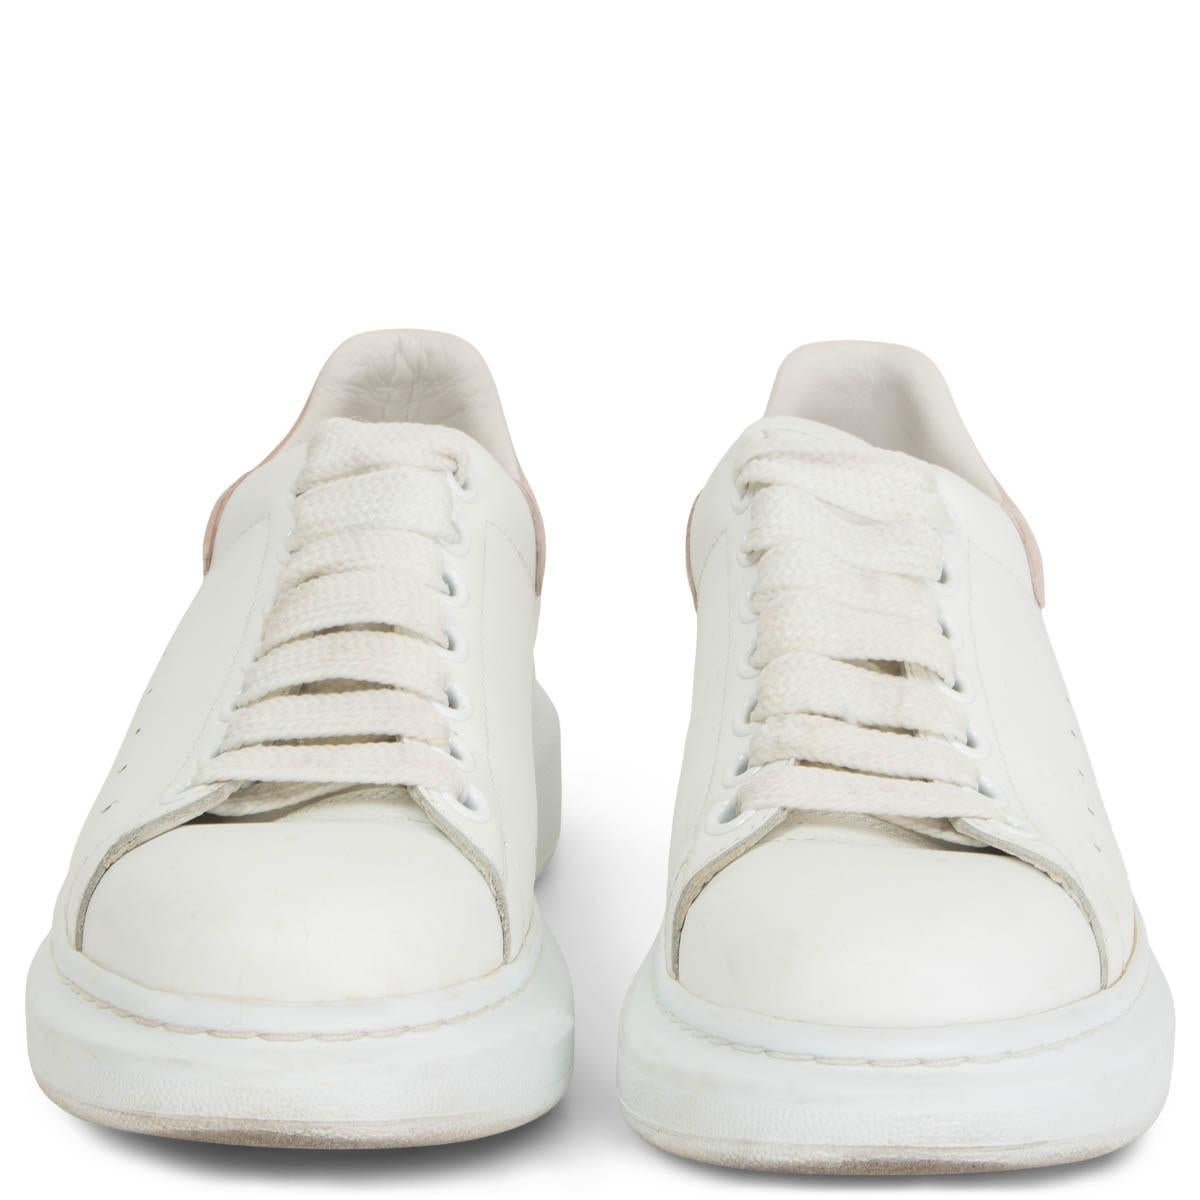 100% authentic Alexander McQueen oversized sneakers in white leather with a chunky rubber sole that features a built-in wedge for height and comfort. The heel is pale pink suede and printed with the designer's logo. Have been worn with some soft